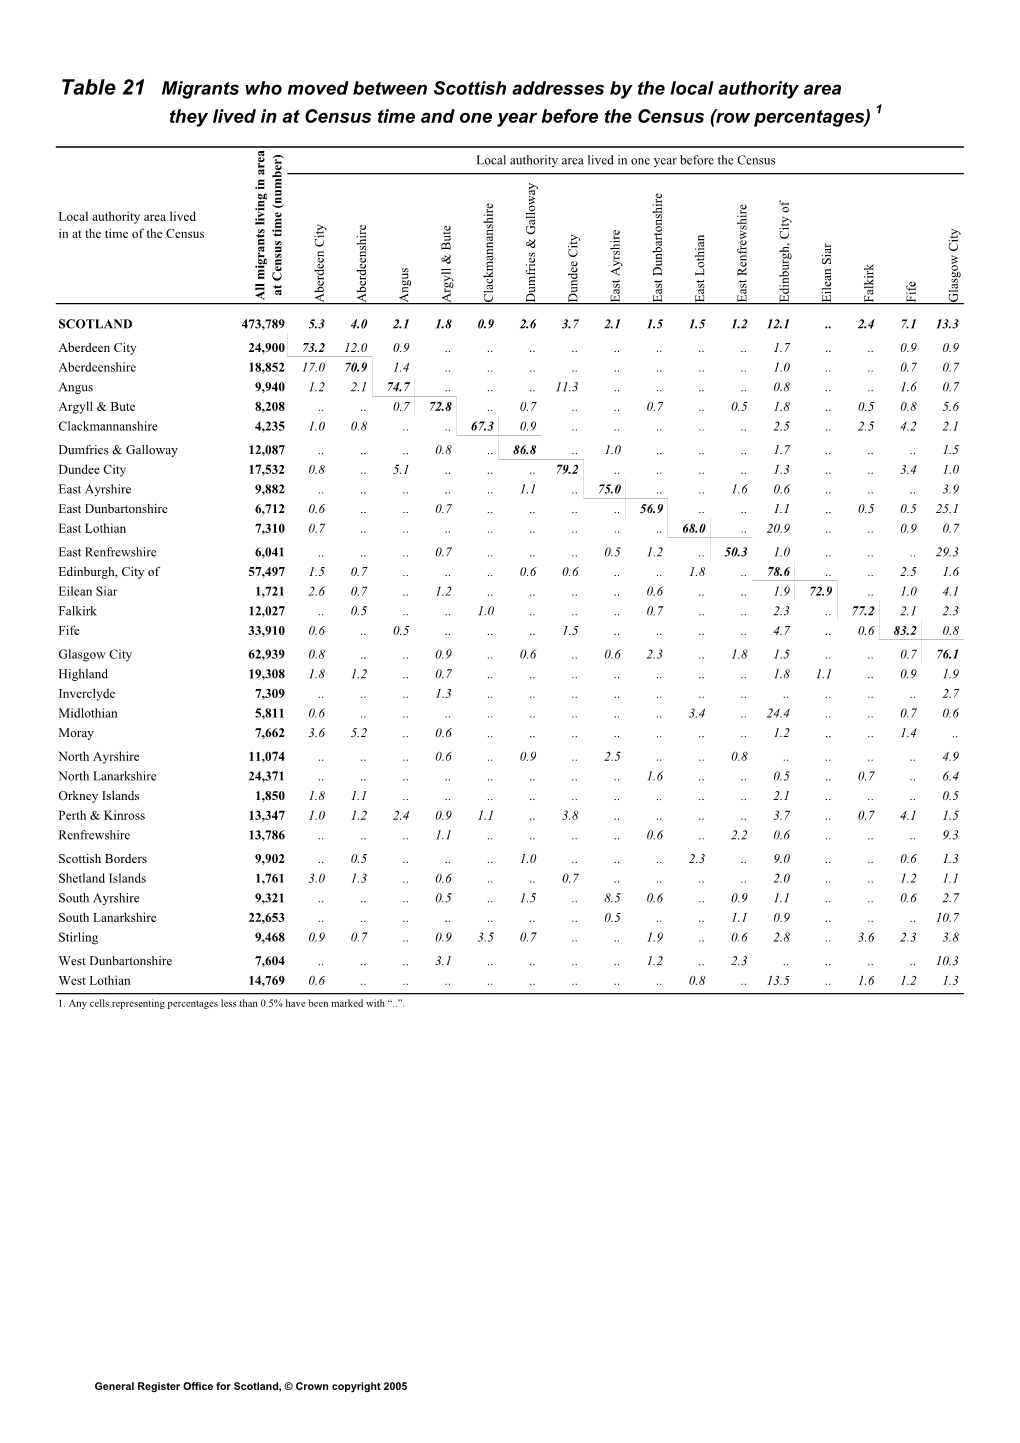 Table 21 Migrants Who Moved Between Scottish Addresses by the Local Authority Area They Lived in at Census Time and One Year Before the Census (Row Percentages) 1